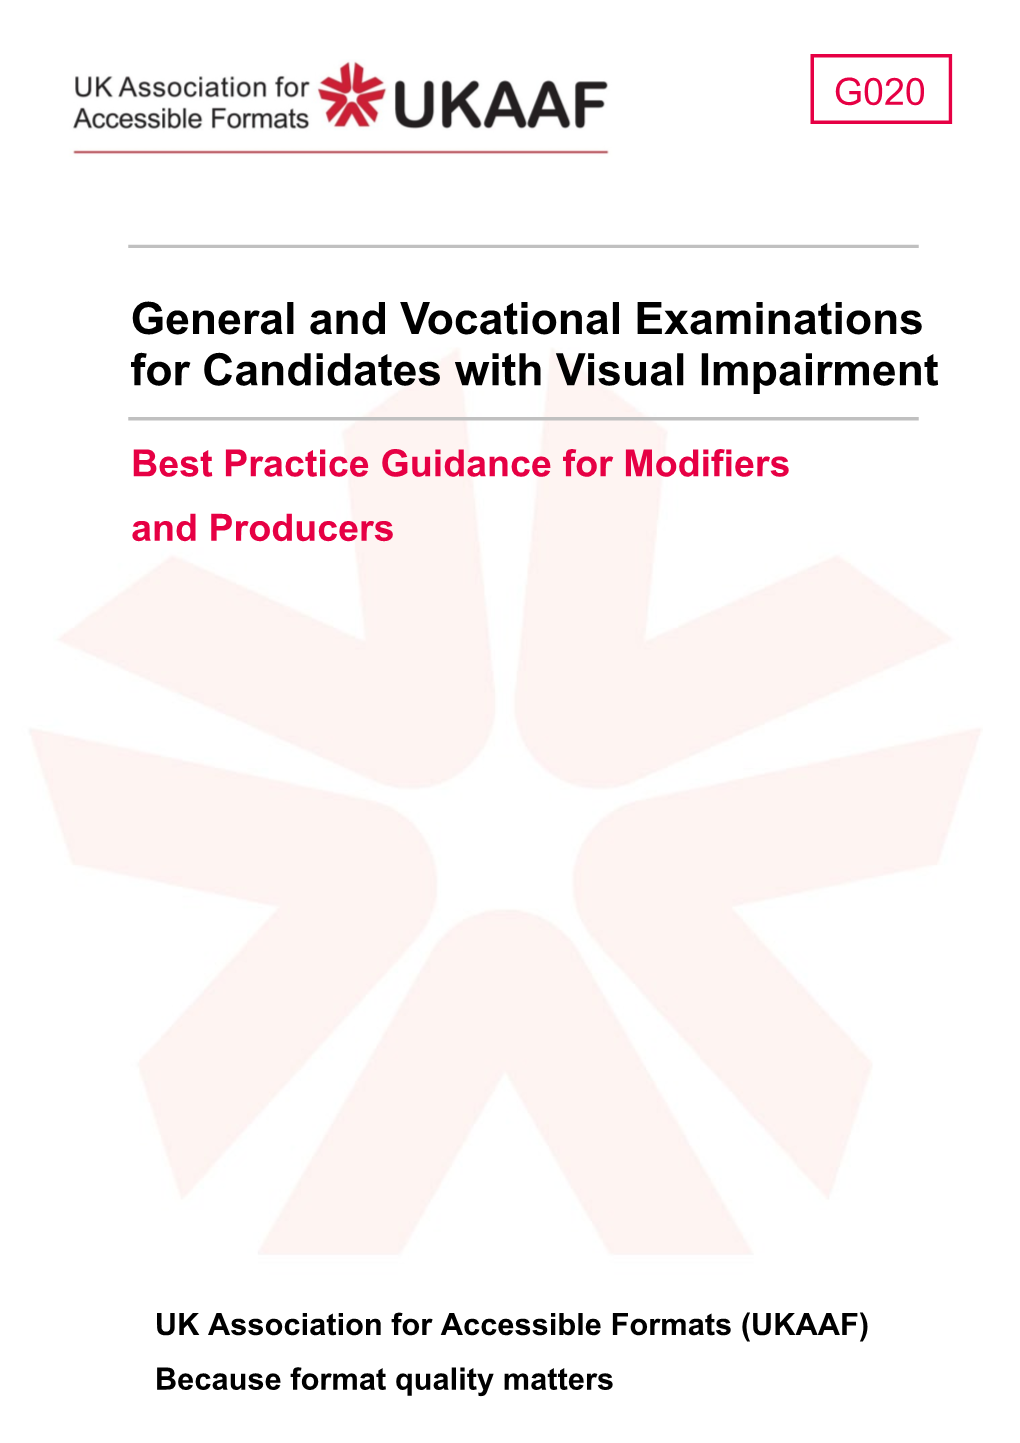 General and Vocational Examinations for Candidates with Visual Impairment